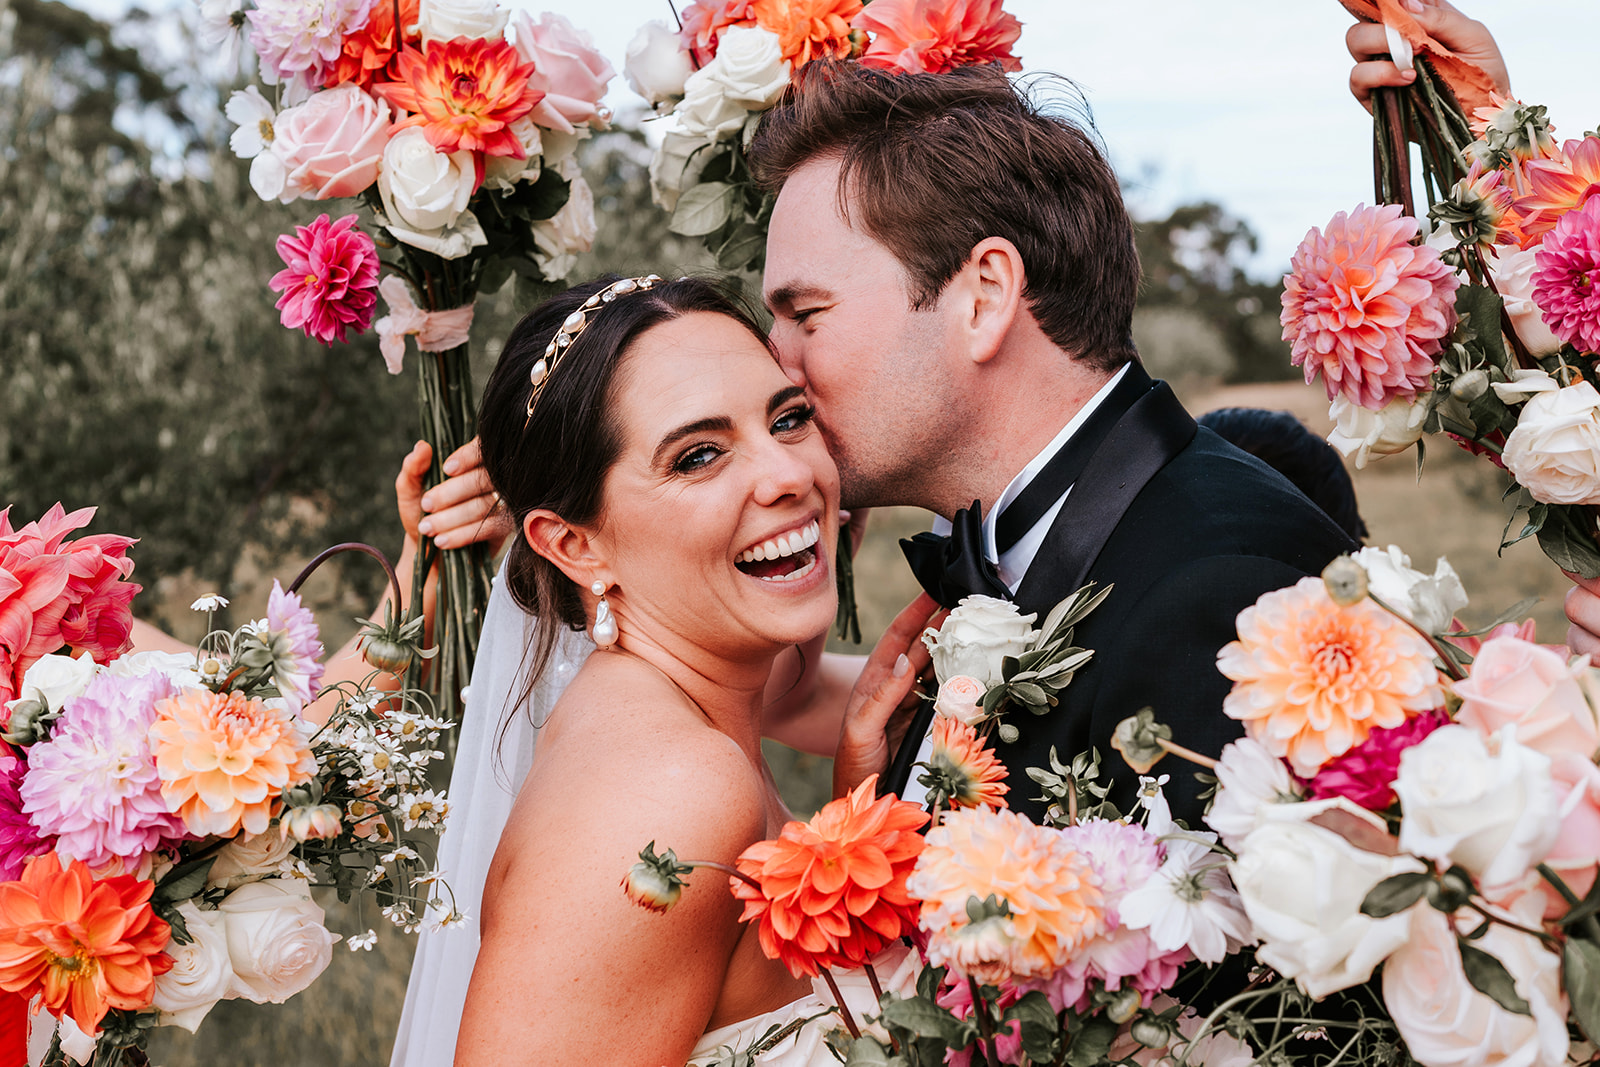 Bride & Groom kissing surrounded by flower bouquets